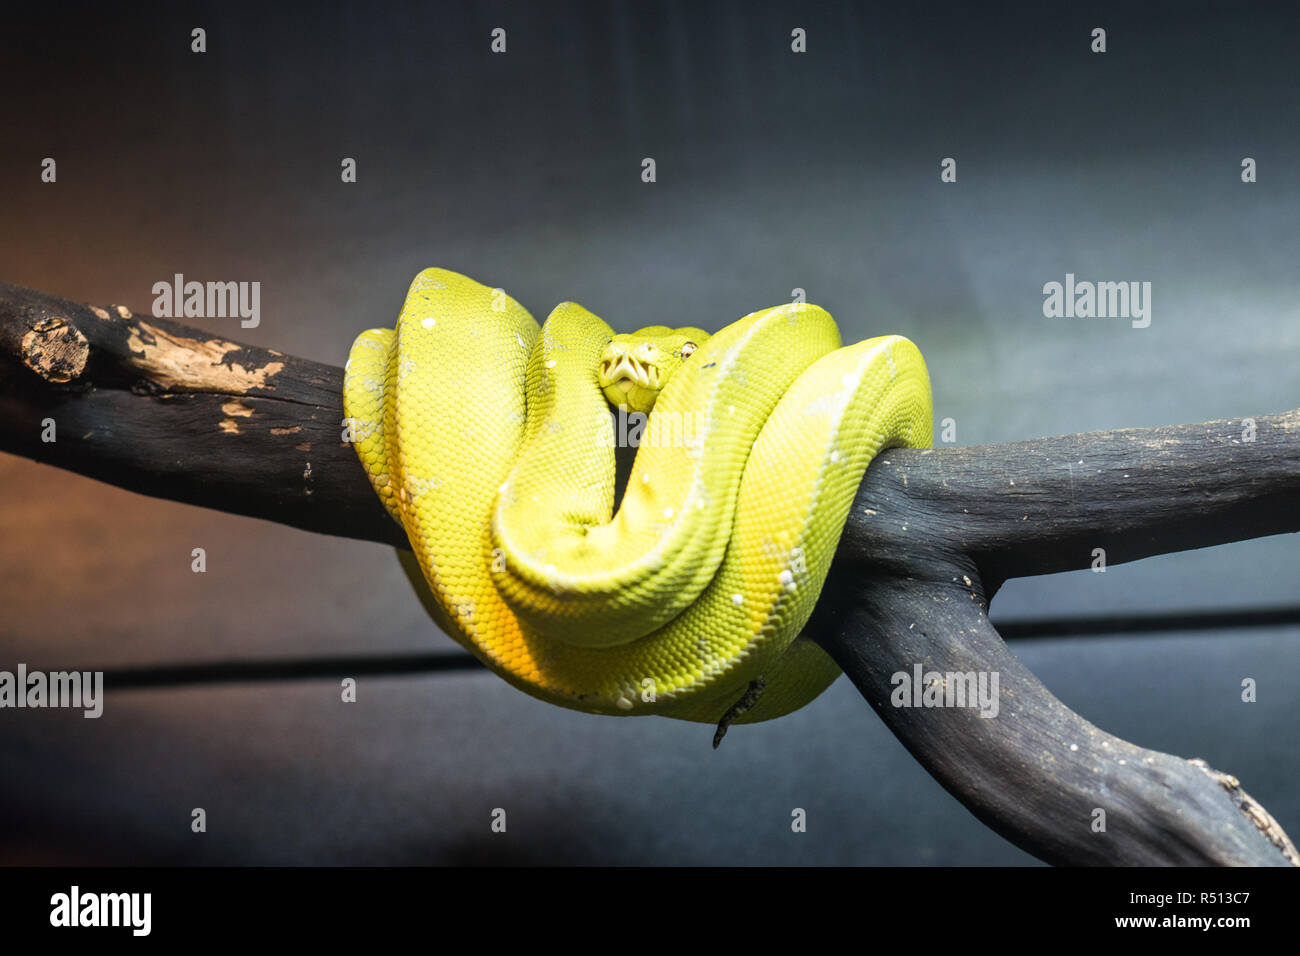 The green tree python - Morelia viridis - is a species of python. Living generally in trees, the green tree python mainly hunts and eats small reptiles and mammals. Stock Photo